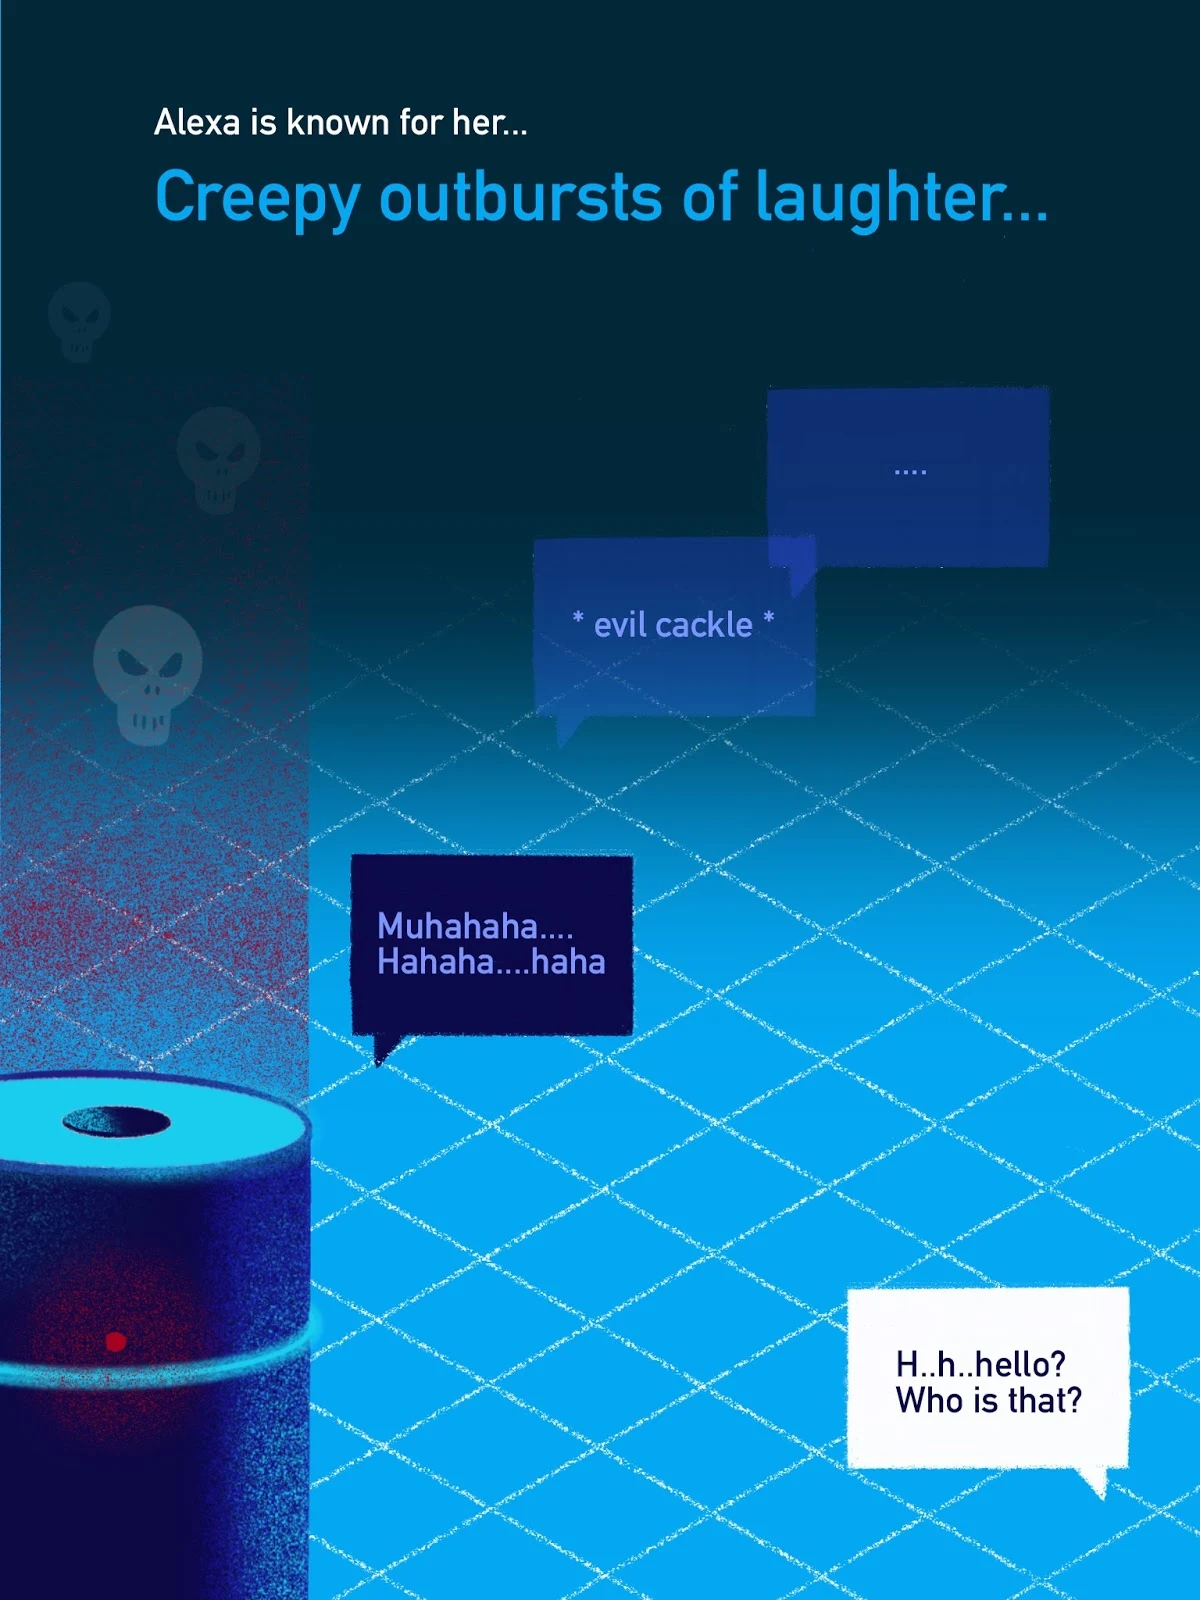 These Visuals illustrate The Creepy Things You Didn't Know Smart Assistants Could Do